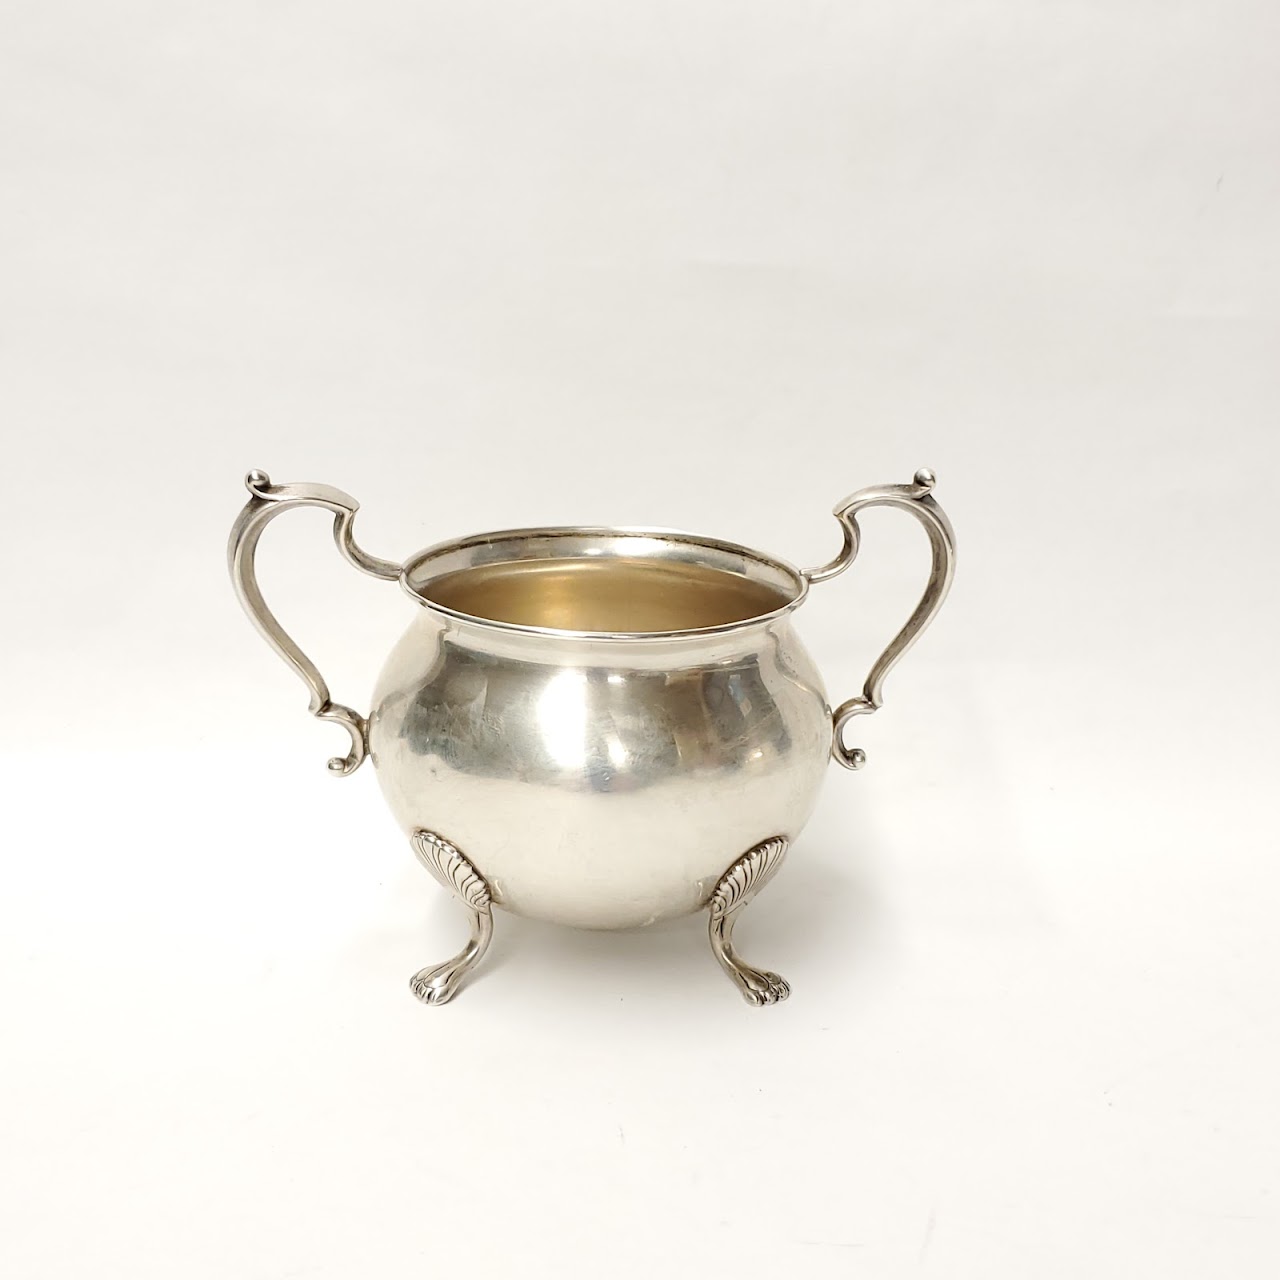 Sterling Silver Fisher Footed Creamer and Sugar Bowl Pair